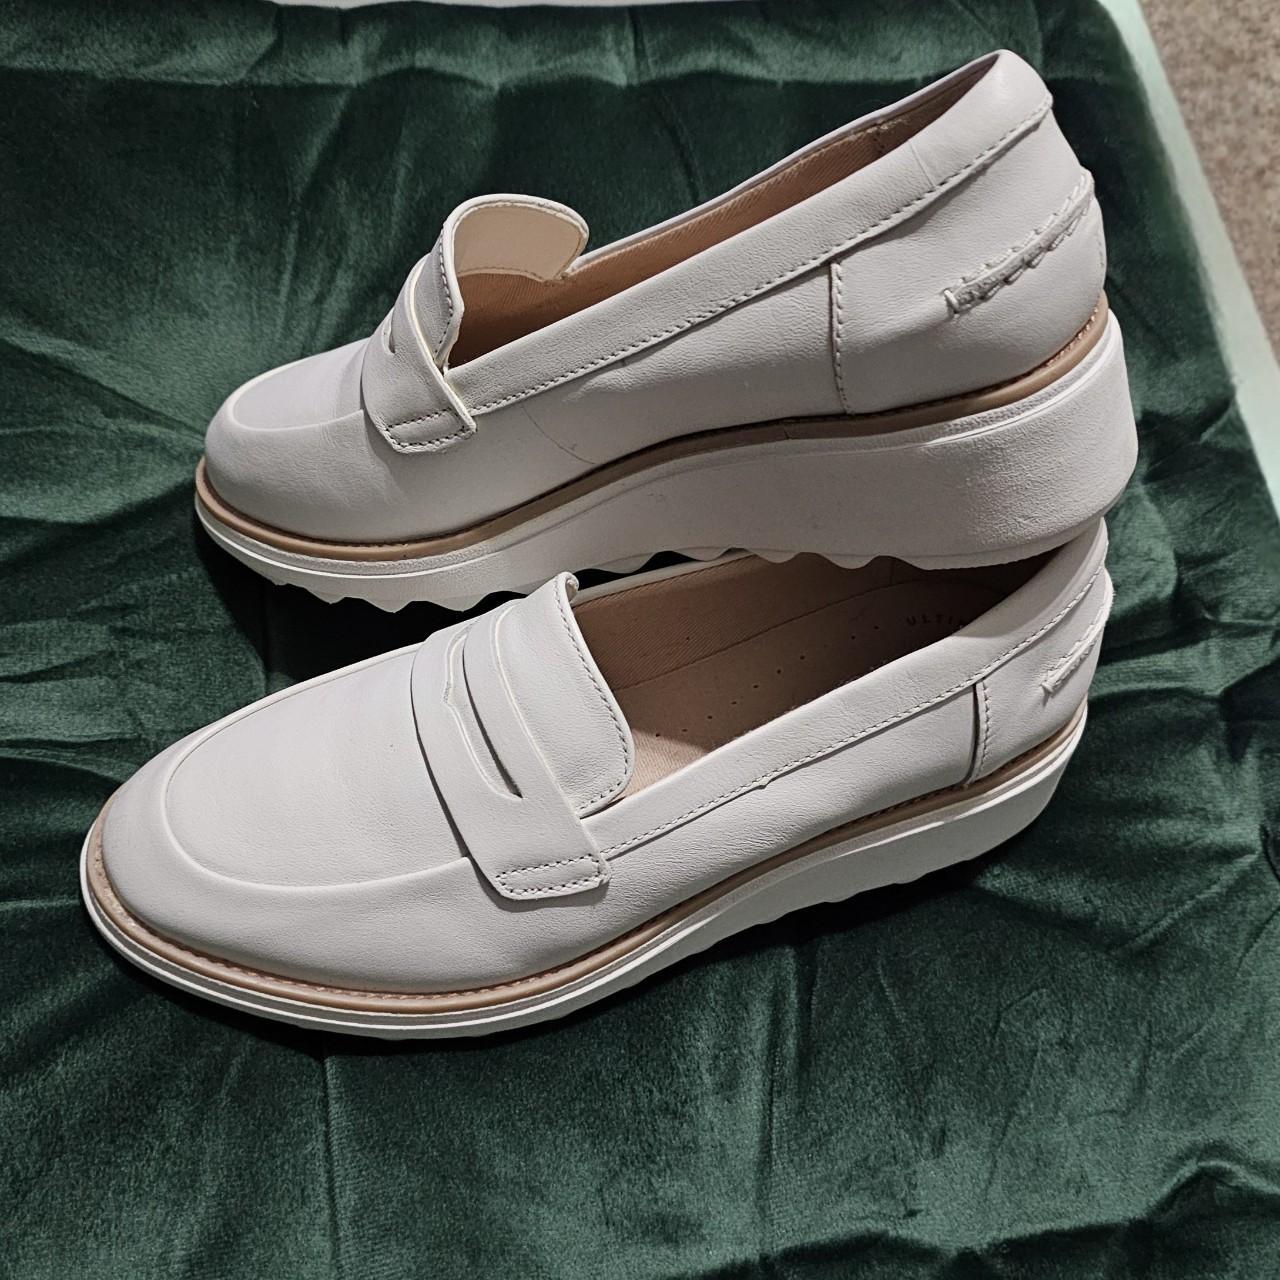 Clarks Women's White Loafers (3)